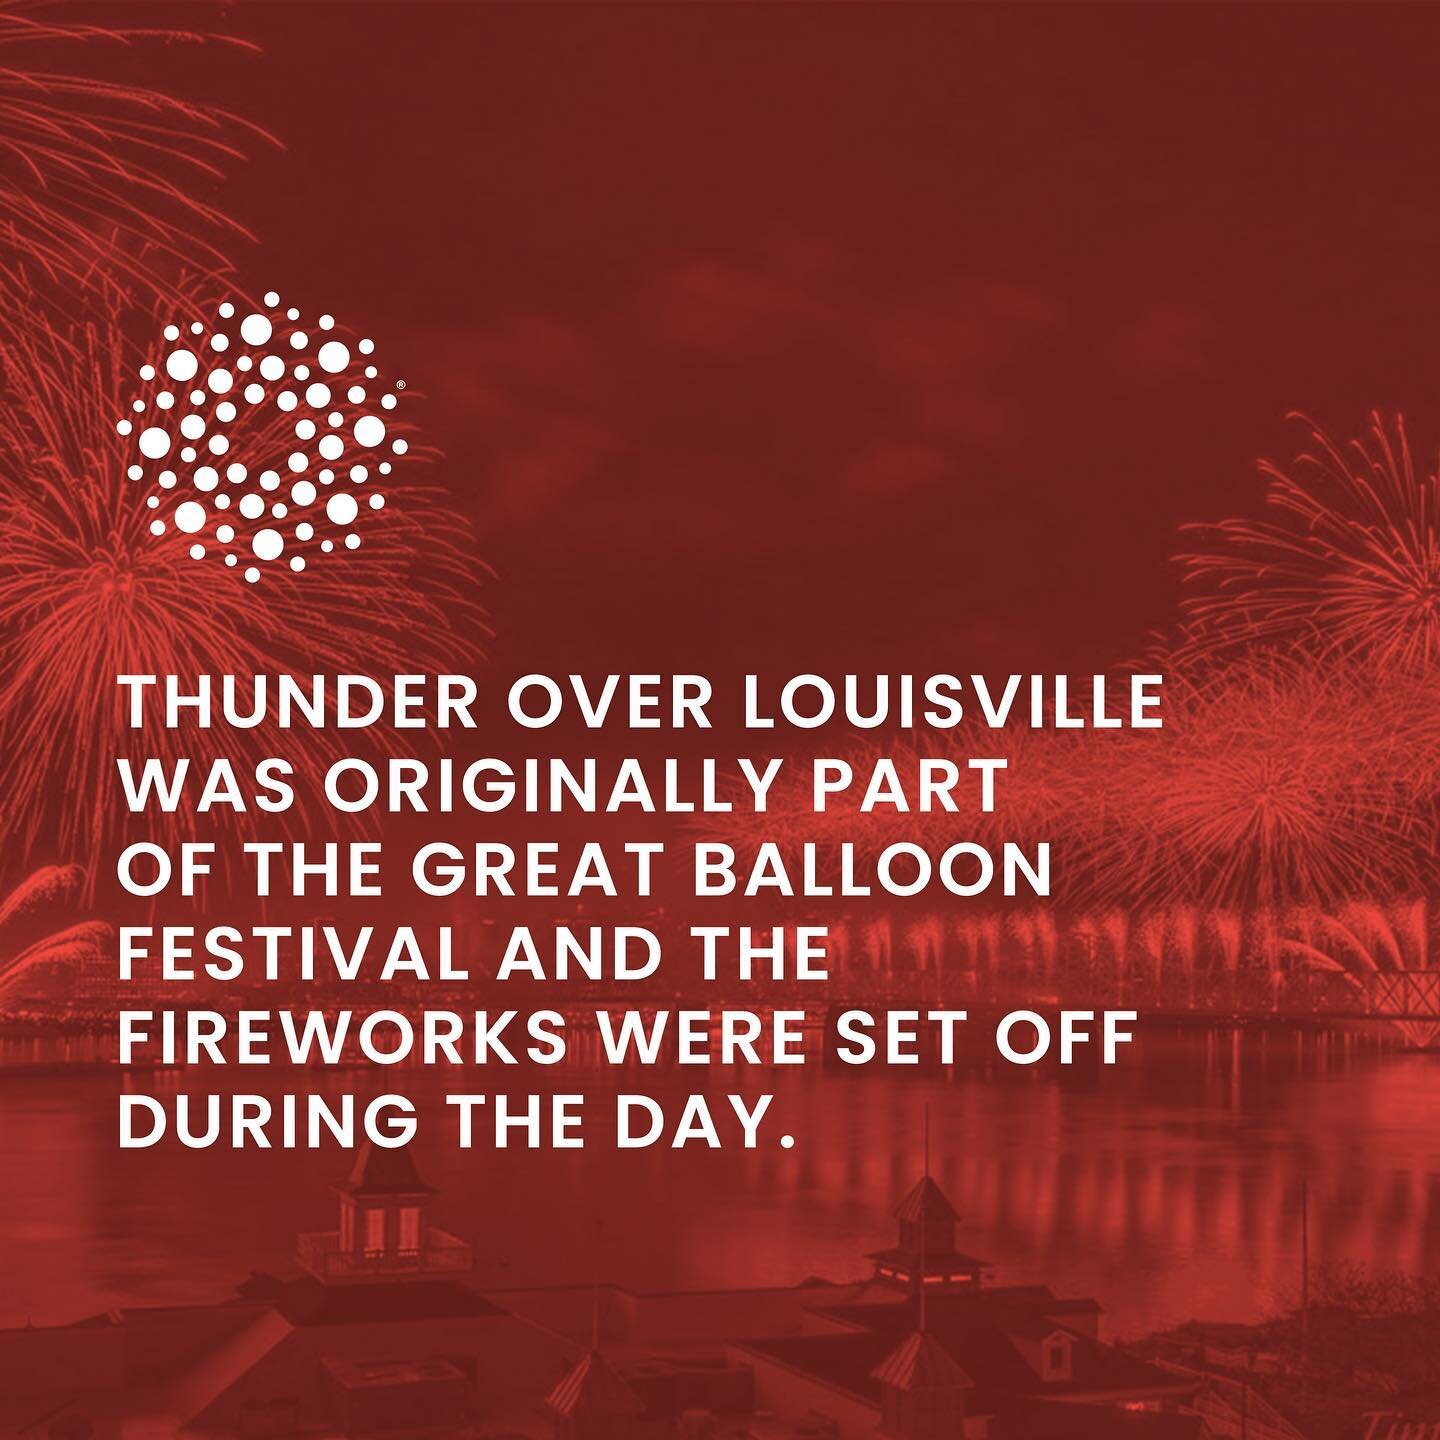 Now known as the largest fireworks display in North America, Thunder Over Louisville started small after a planning session at a skate park in Western Kentucky in 1988.